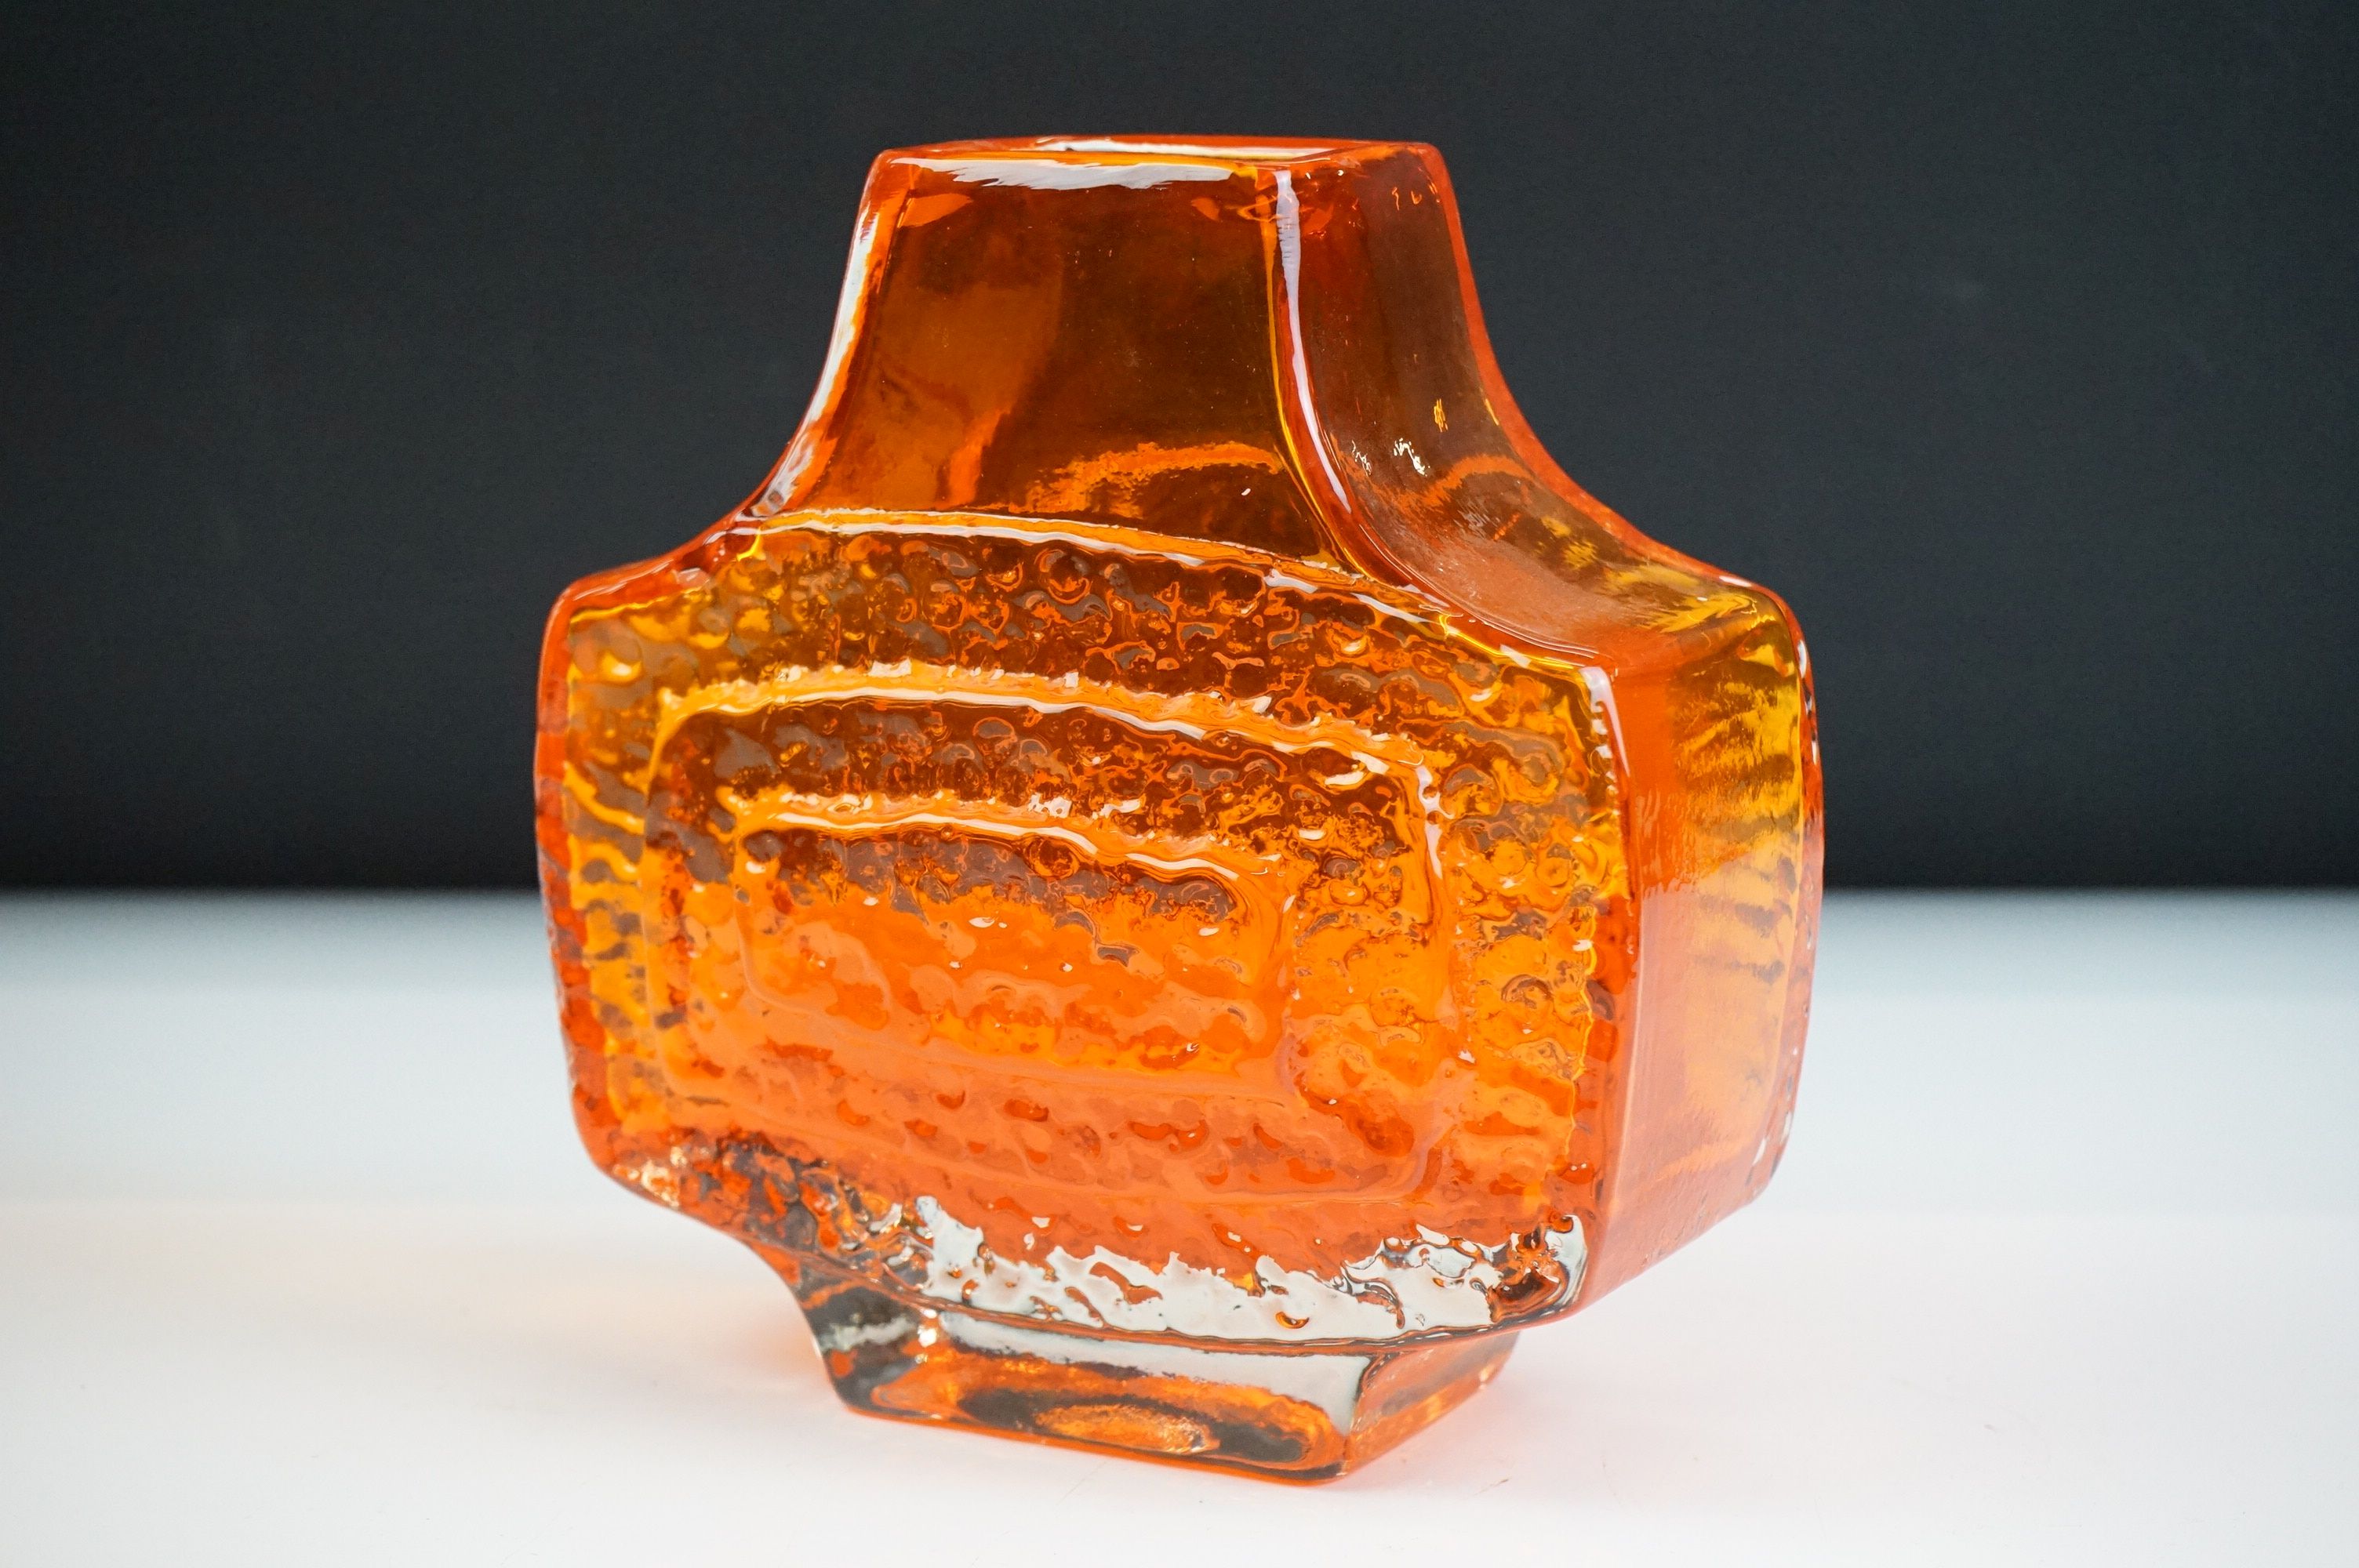 Whitefriars Textured Glass Concentric ' TV ' Pattern Vase, pattern no. 9677, in the Tangerine - Image 4 of 9